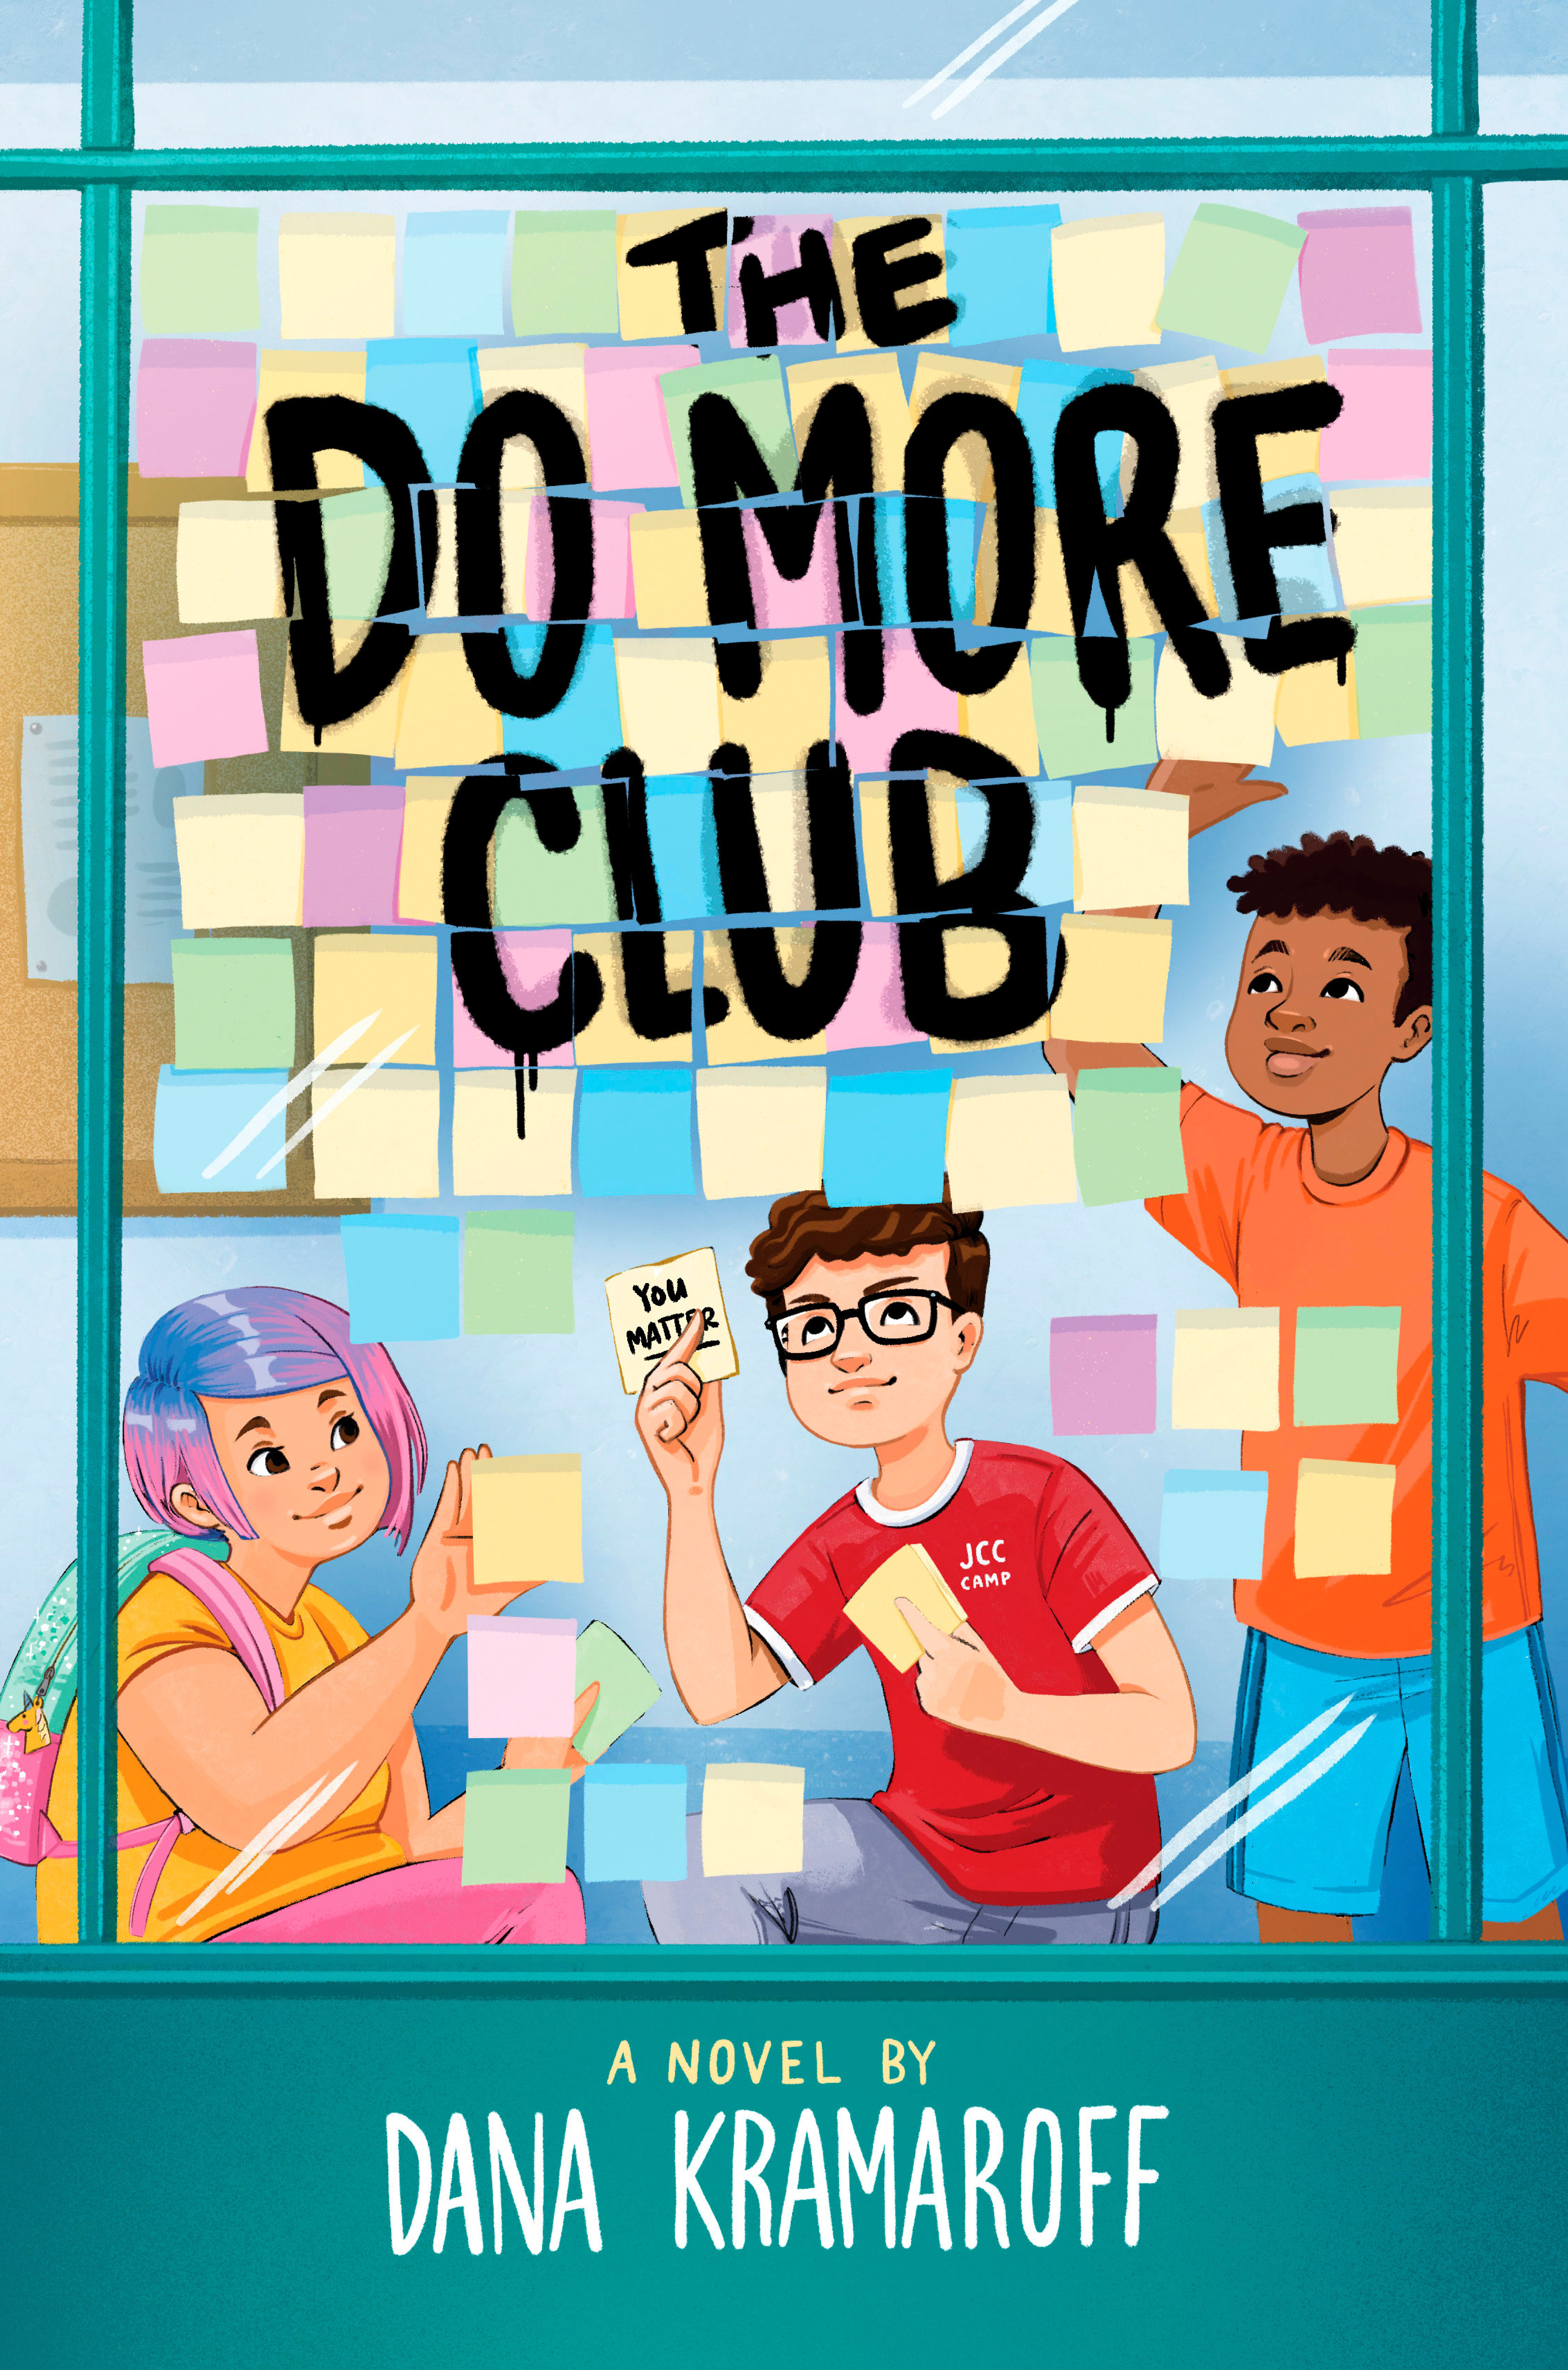 The Do More Club (Hardcover Book)